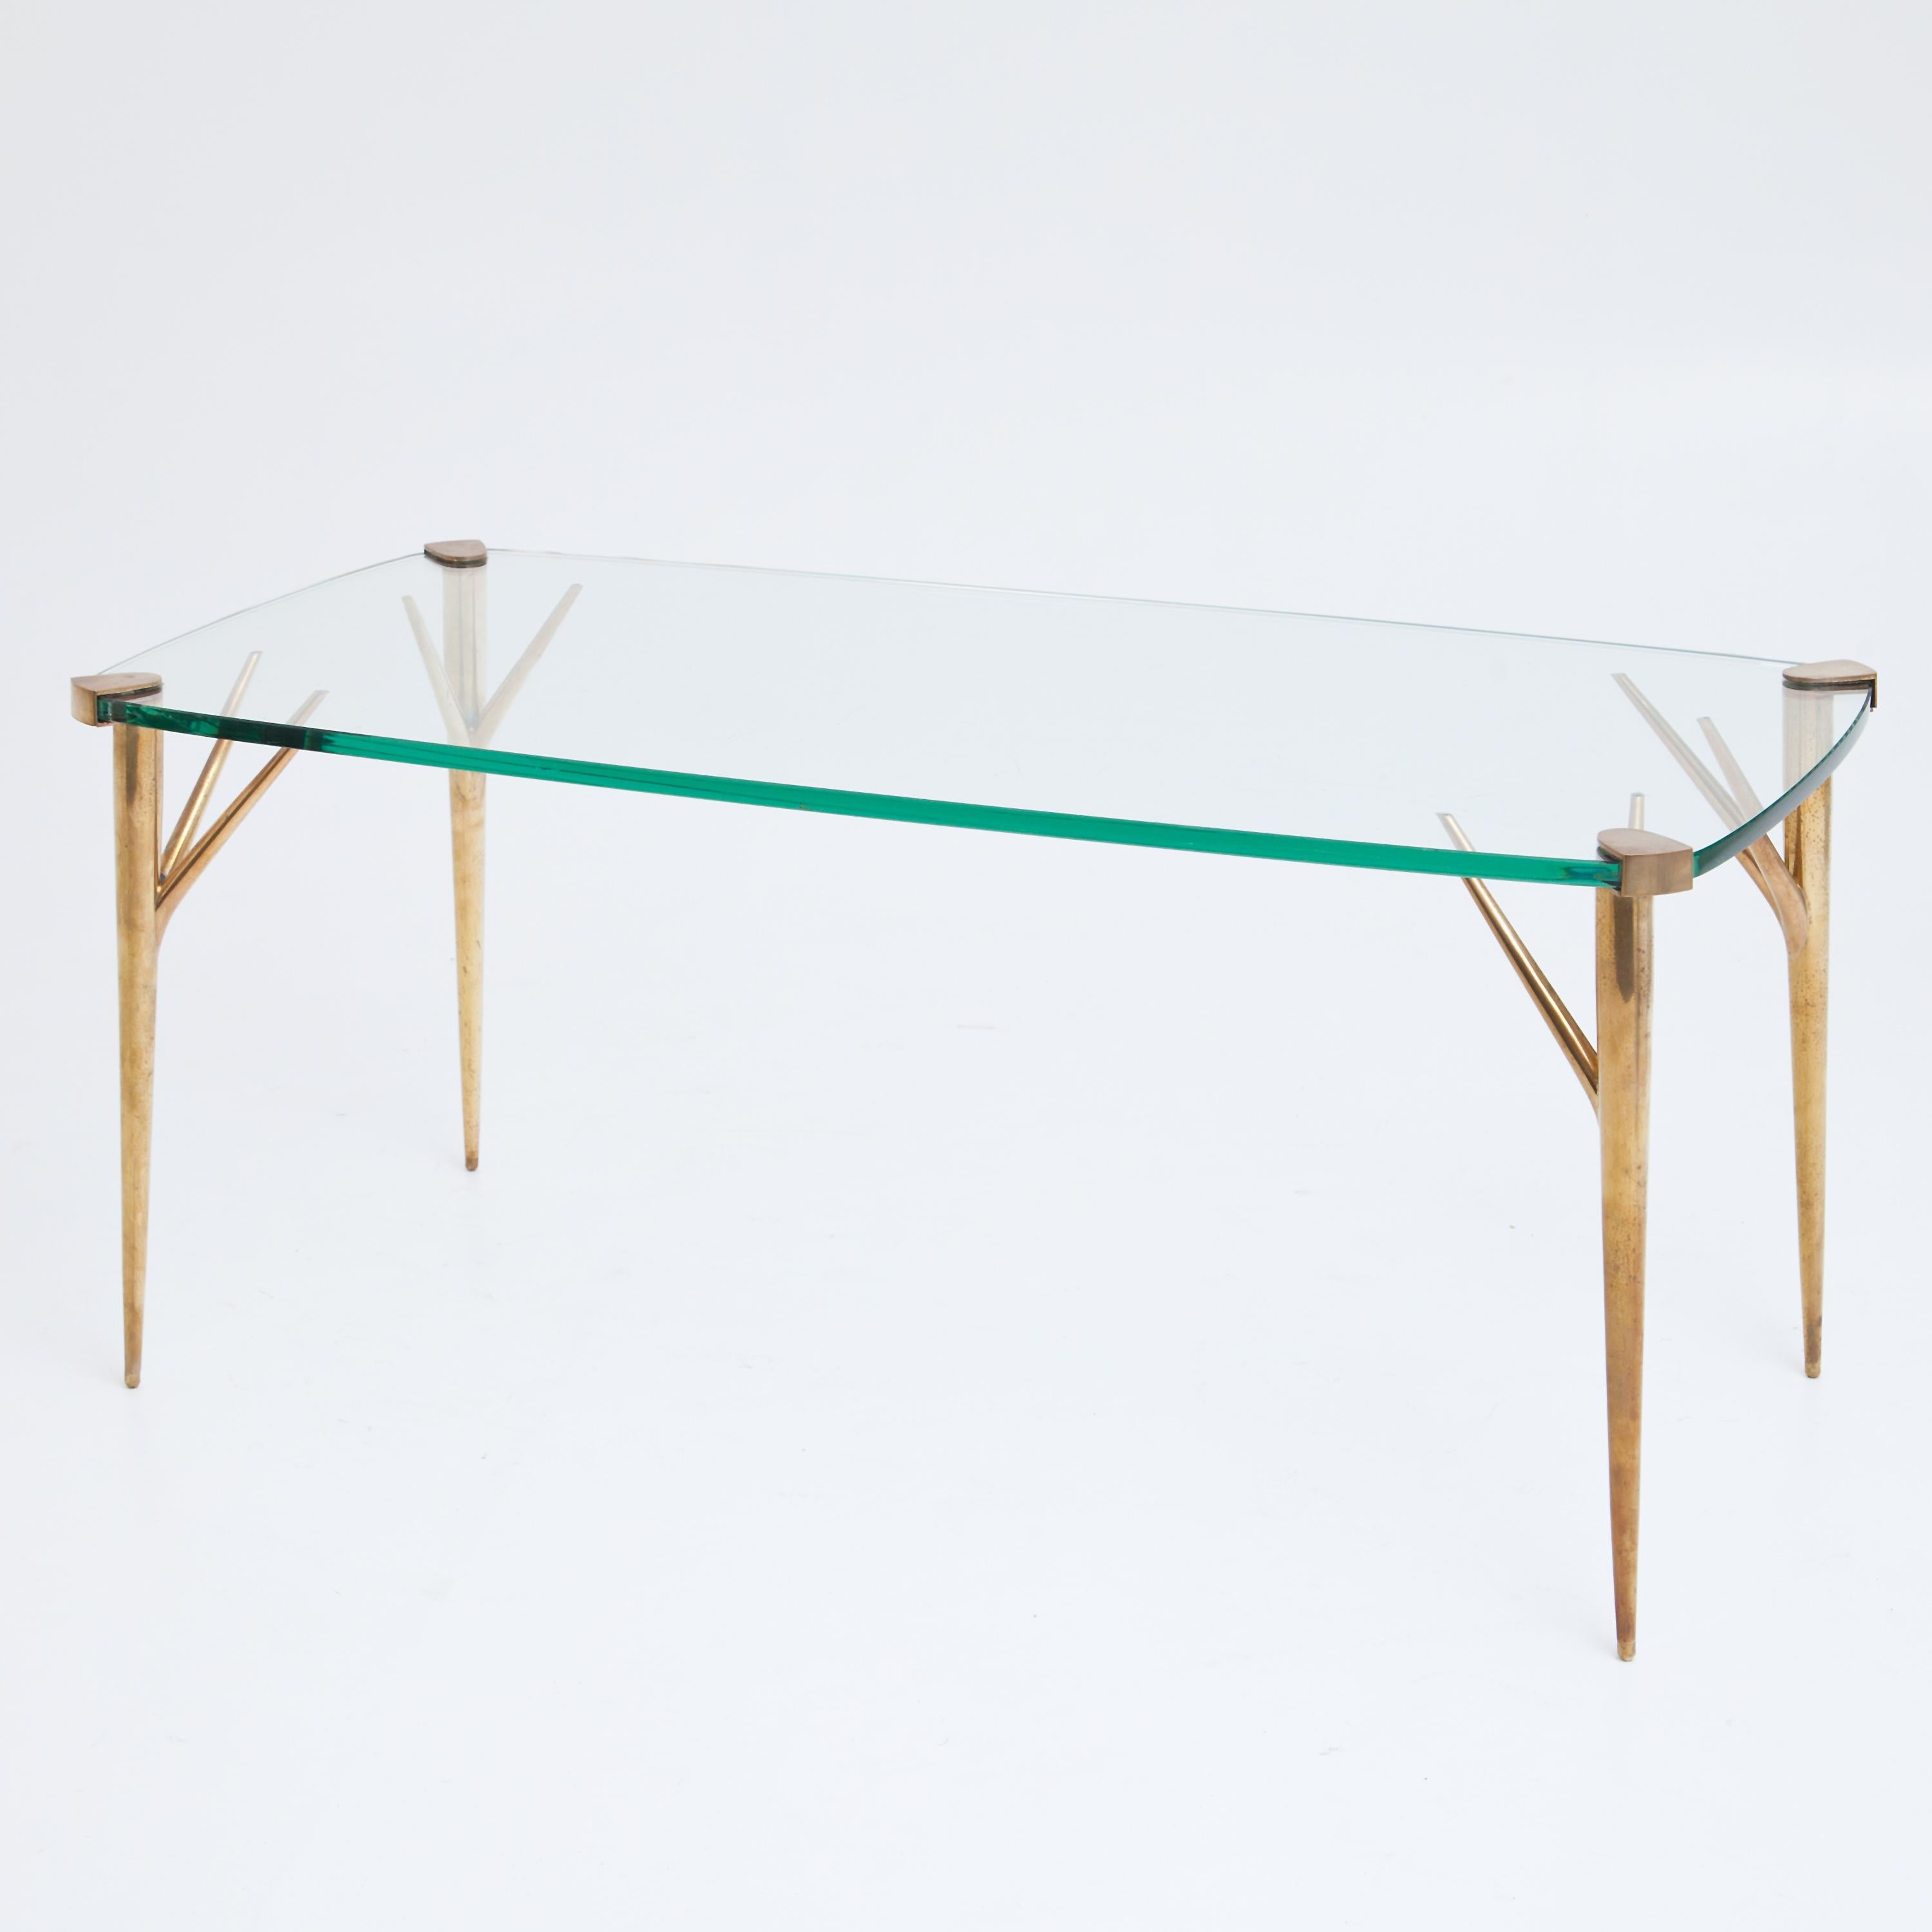 Coffee table on four forked brass legs supporting the slightly rounded glass top. The table was designed in 1956 by Max Ingrand for Fontana Arte.